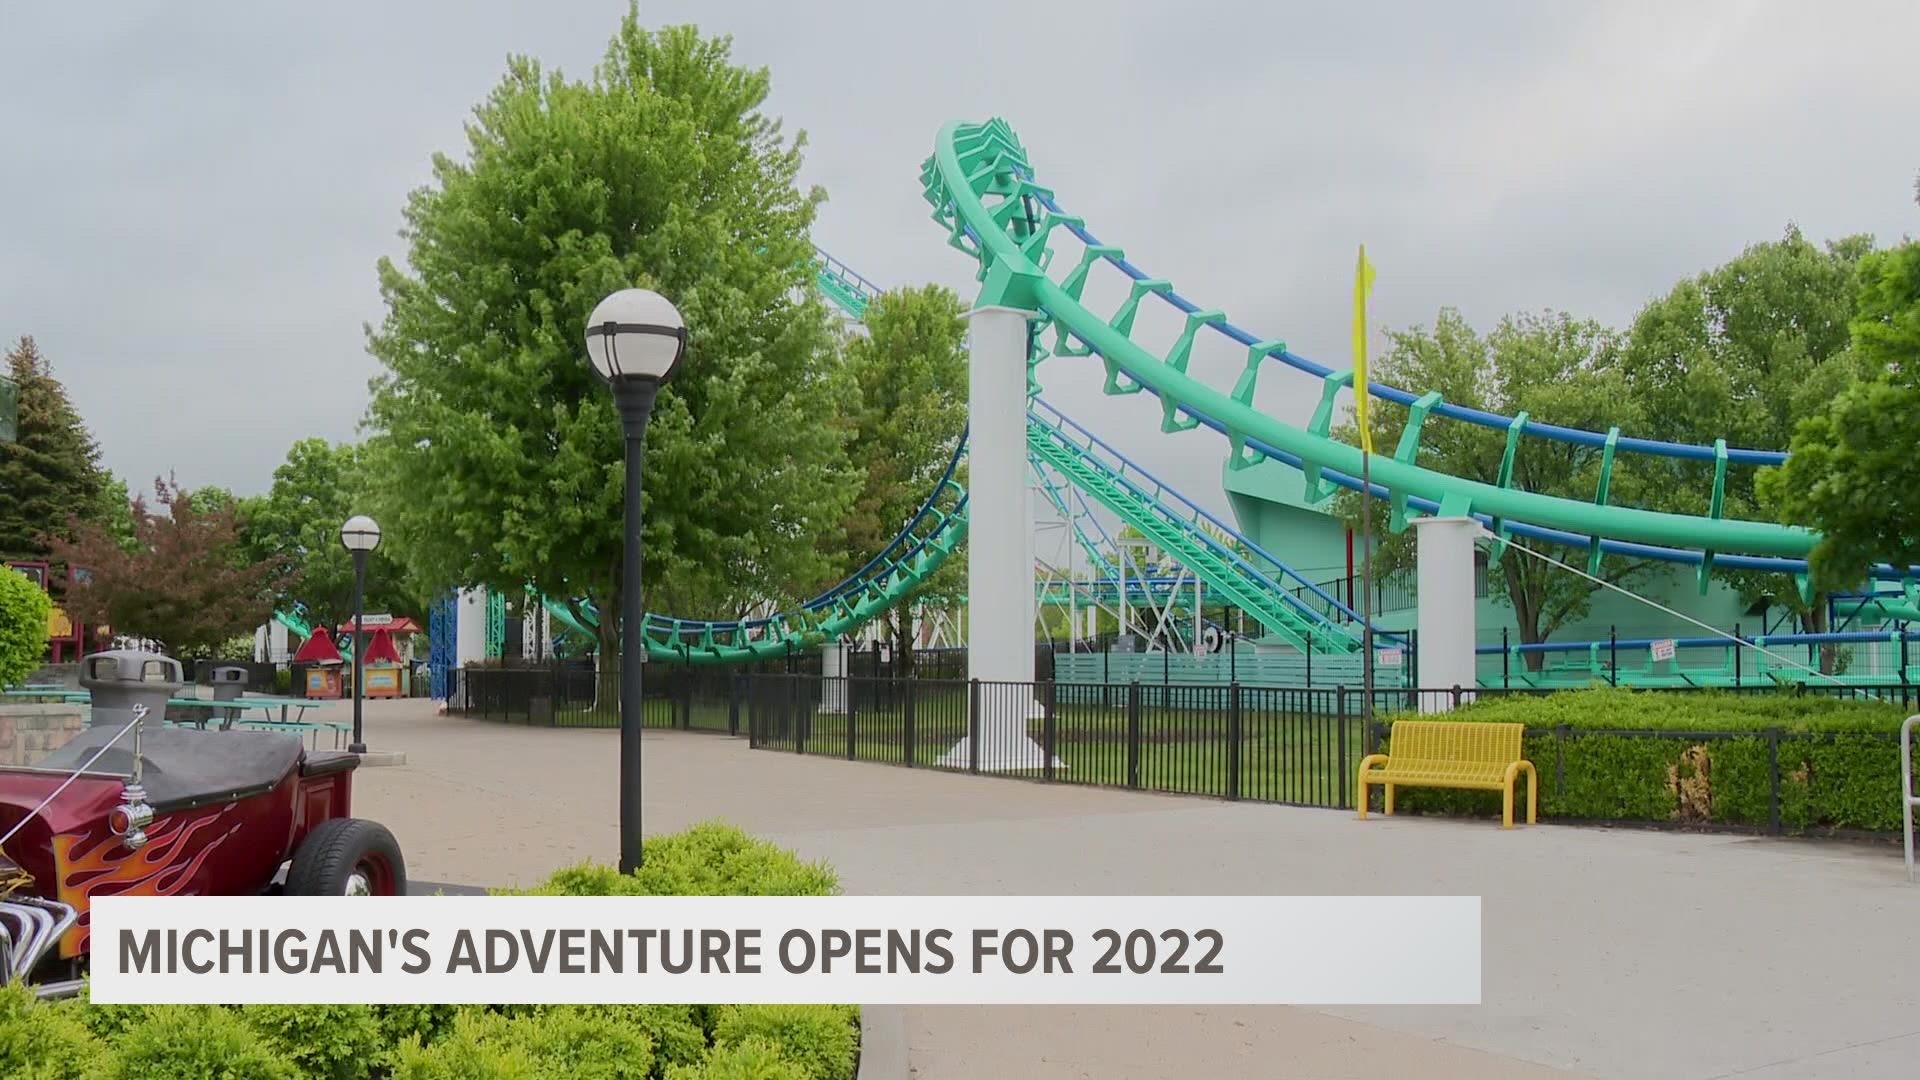 Two of the rollercoasters got an updated look with new color palettes, and the park's 50s-themed restaurant has an updated menu.